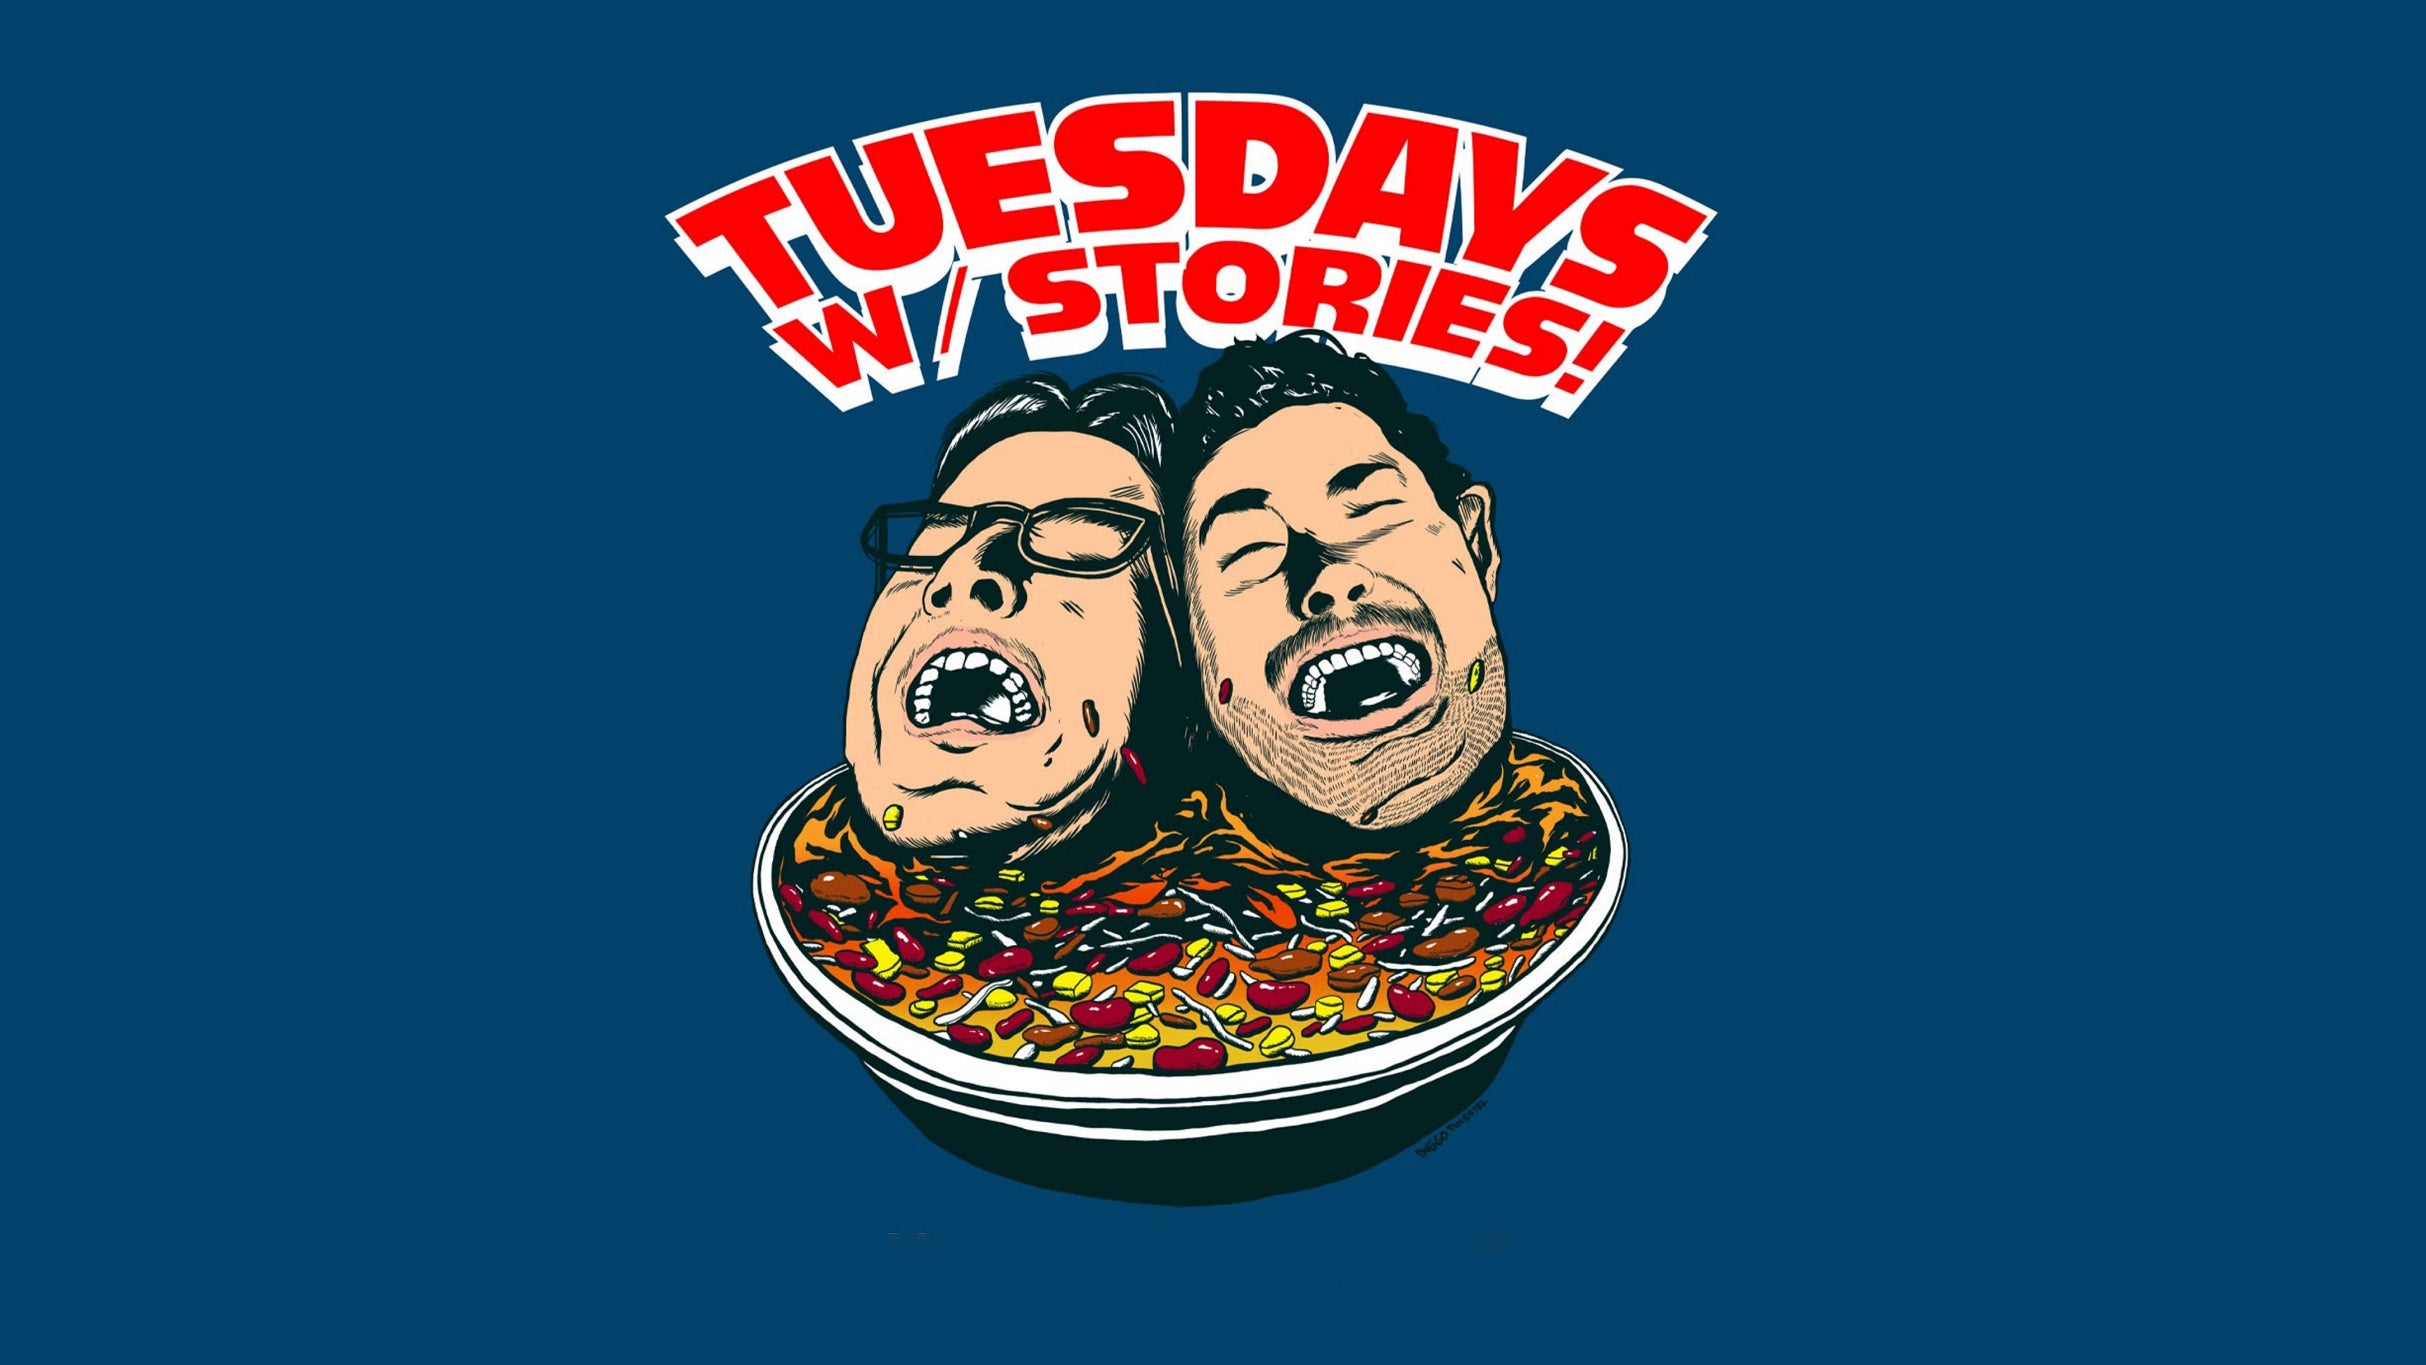 Tuesdays with Stories! presale password for show tickets in Philadelphia, PA (Theatre of Living Arts)